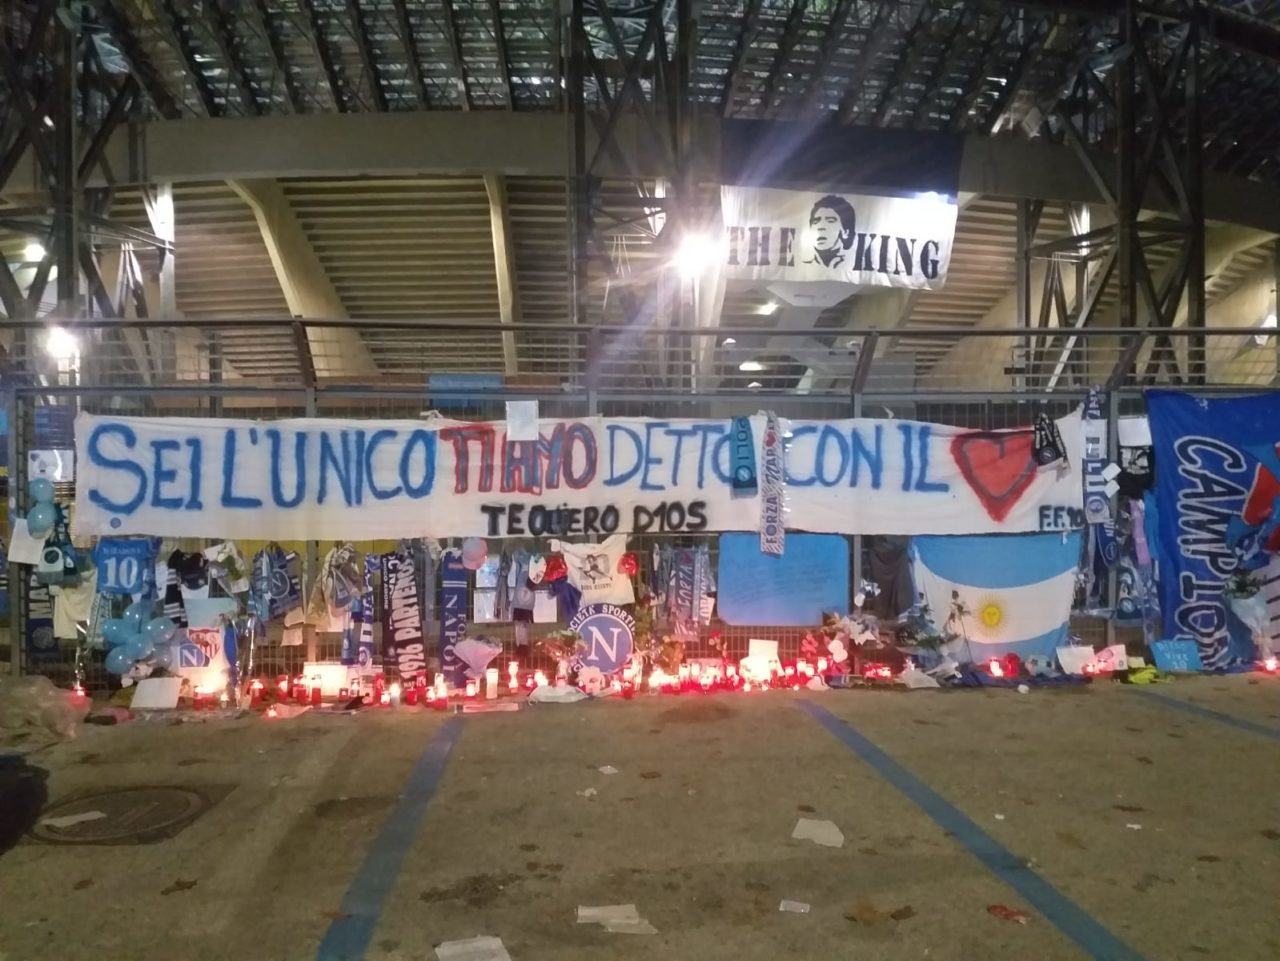 Napoli fans pay tribute to Diego Armando Maradona outside the stadio San Paolo the day after his death